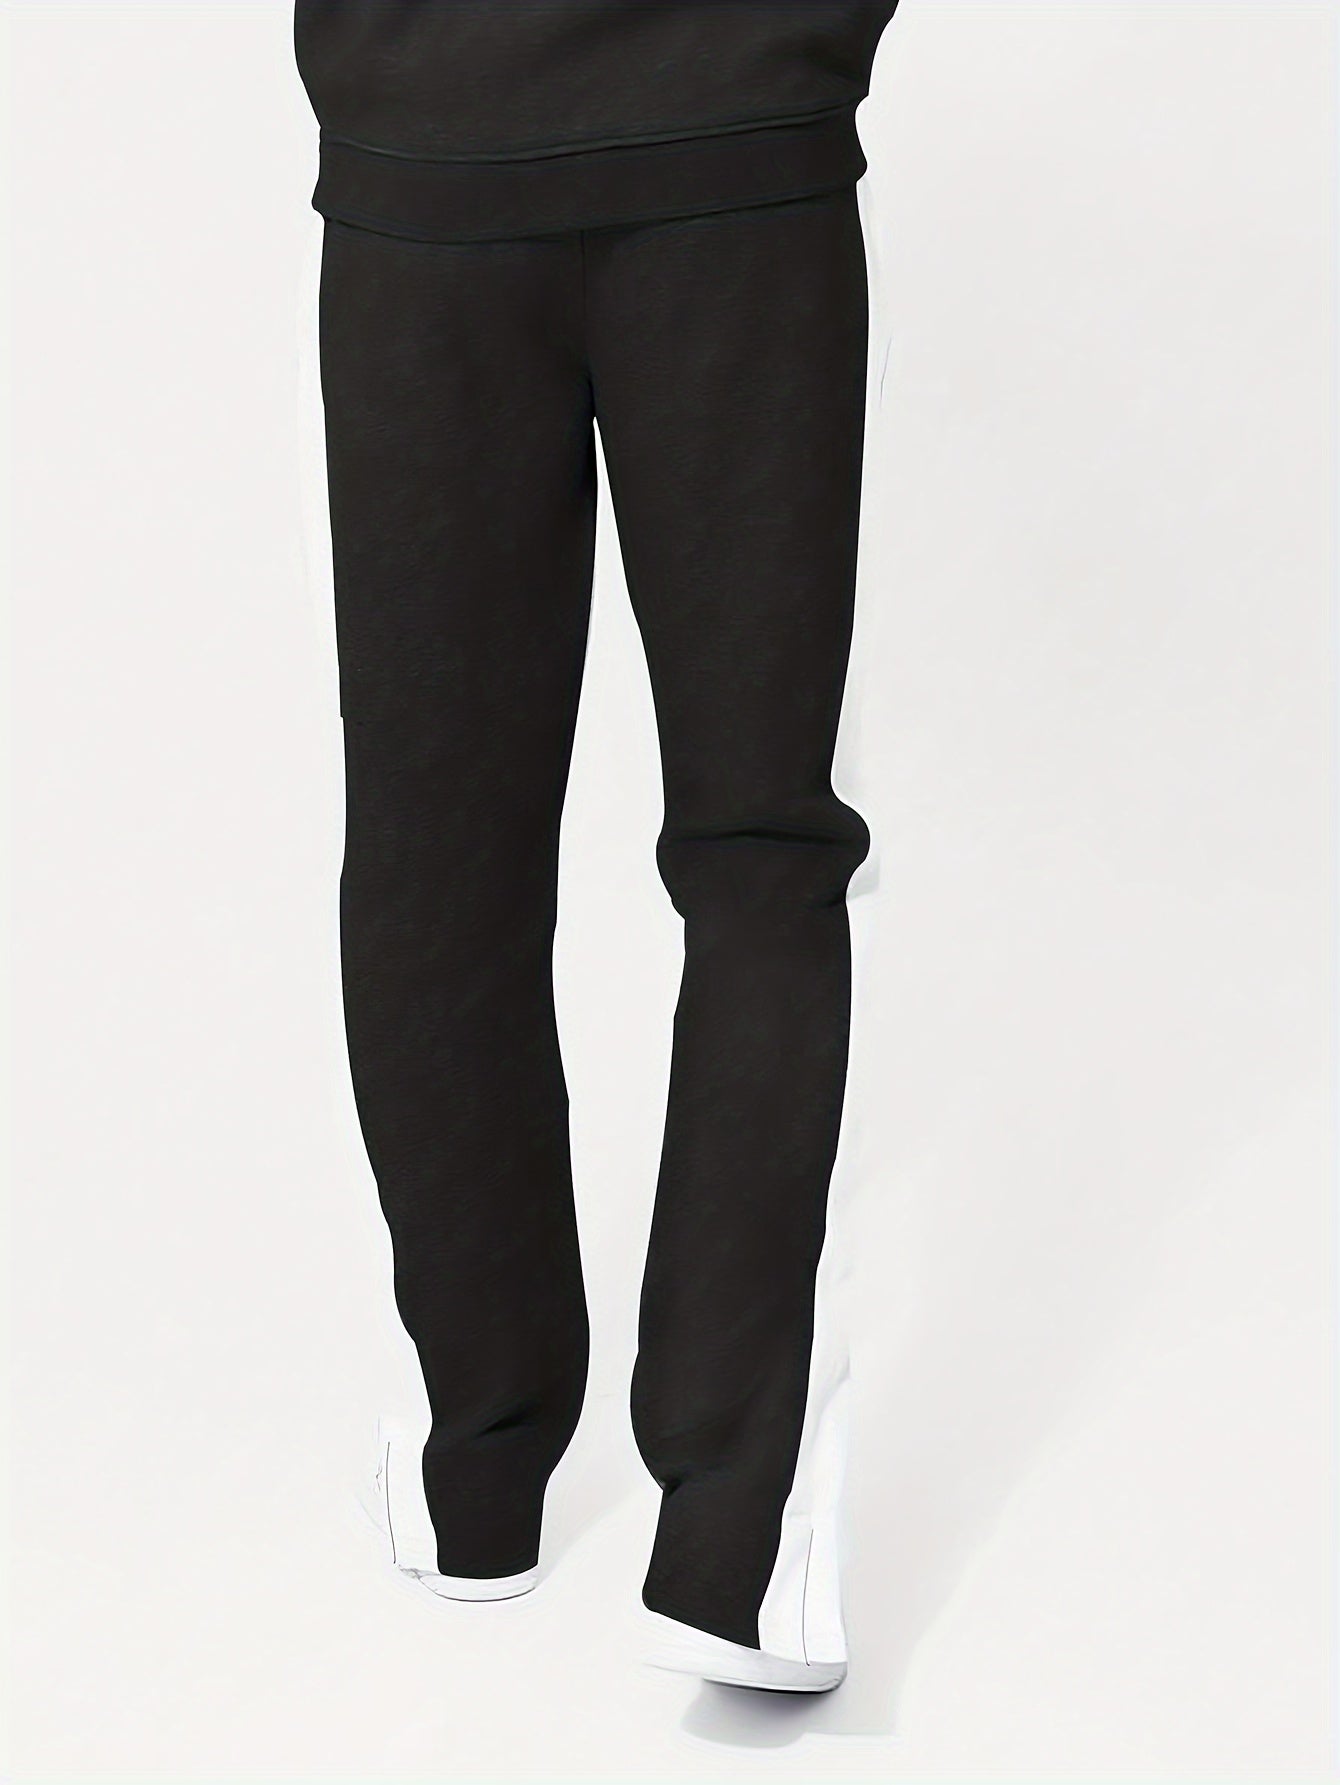 Men's Leisure Joggers - Lightweight, Colorblock Design with Pockets